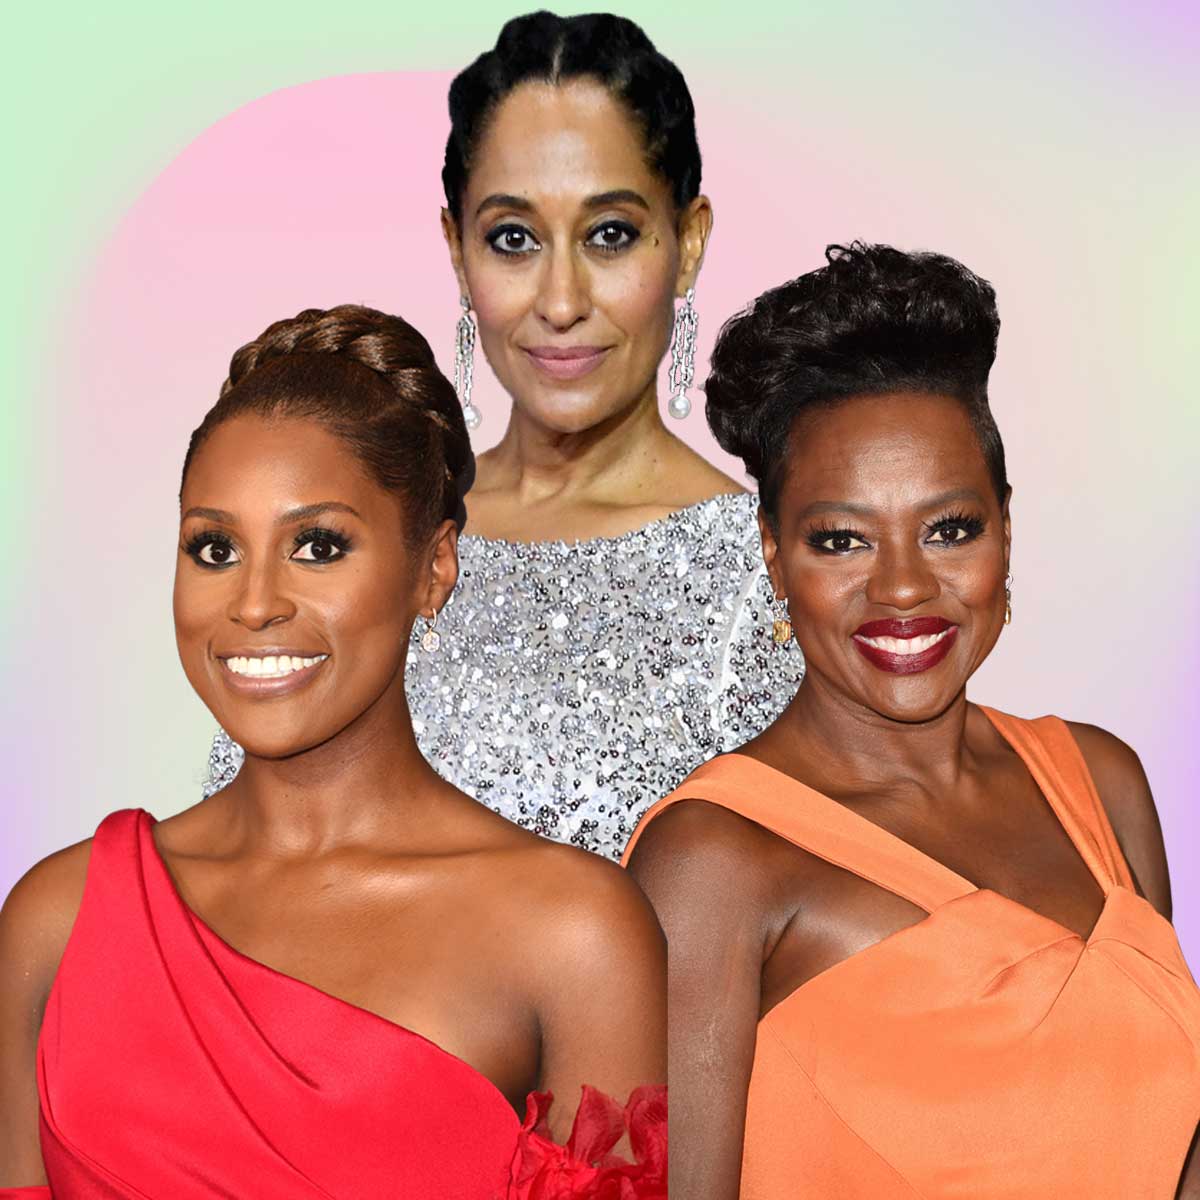 All The Gowns From The Emmys Red Carpet Are Way Too Stunning To Miss 
